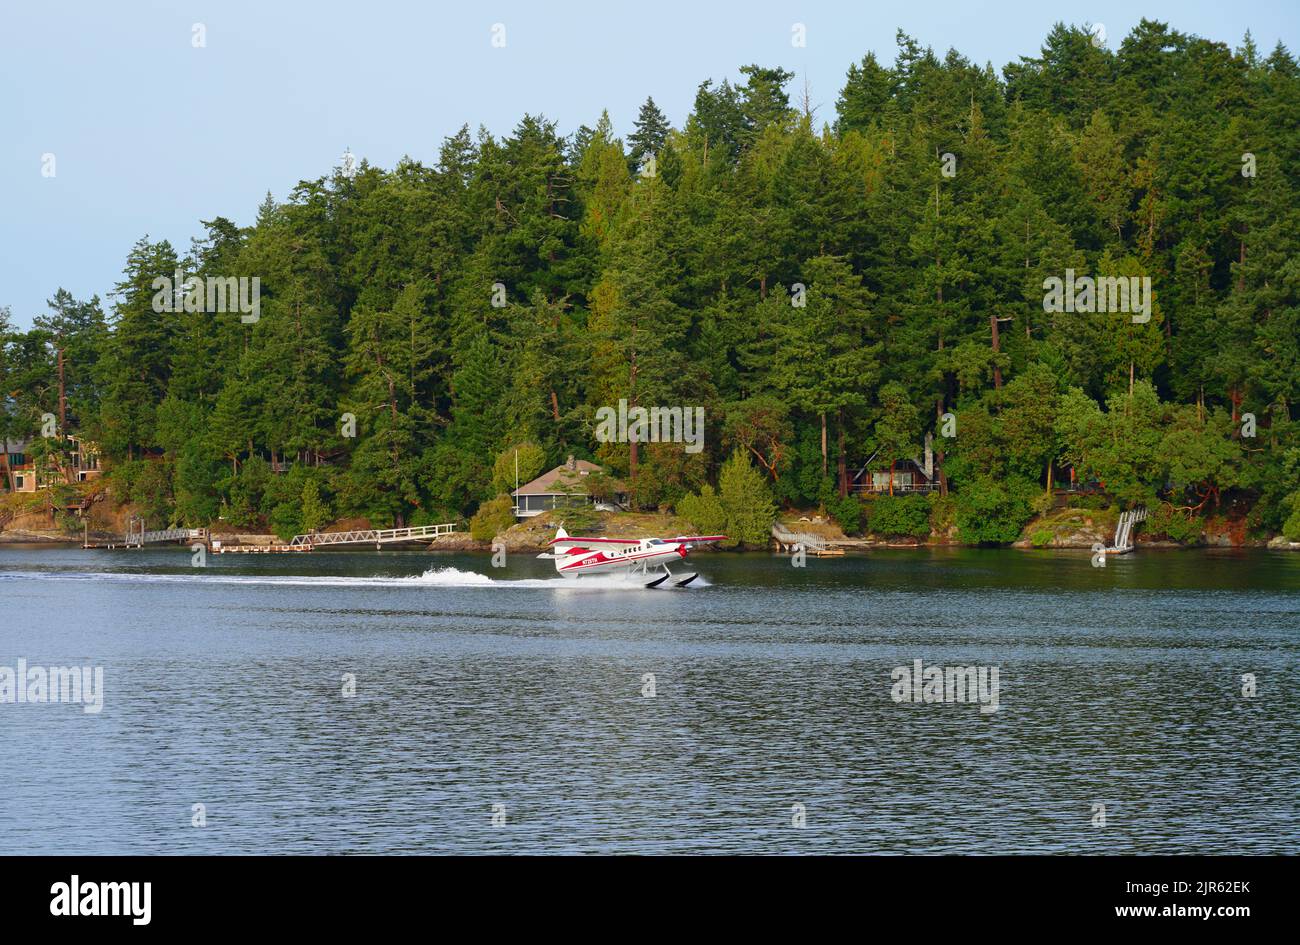 FRIDAY HARBOR, WA -1 OCT 2021- View of a seaplane on the water in the port of Friday Harbor, San Juan Islands, Washington State, United States. Stock Photo